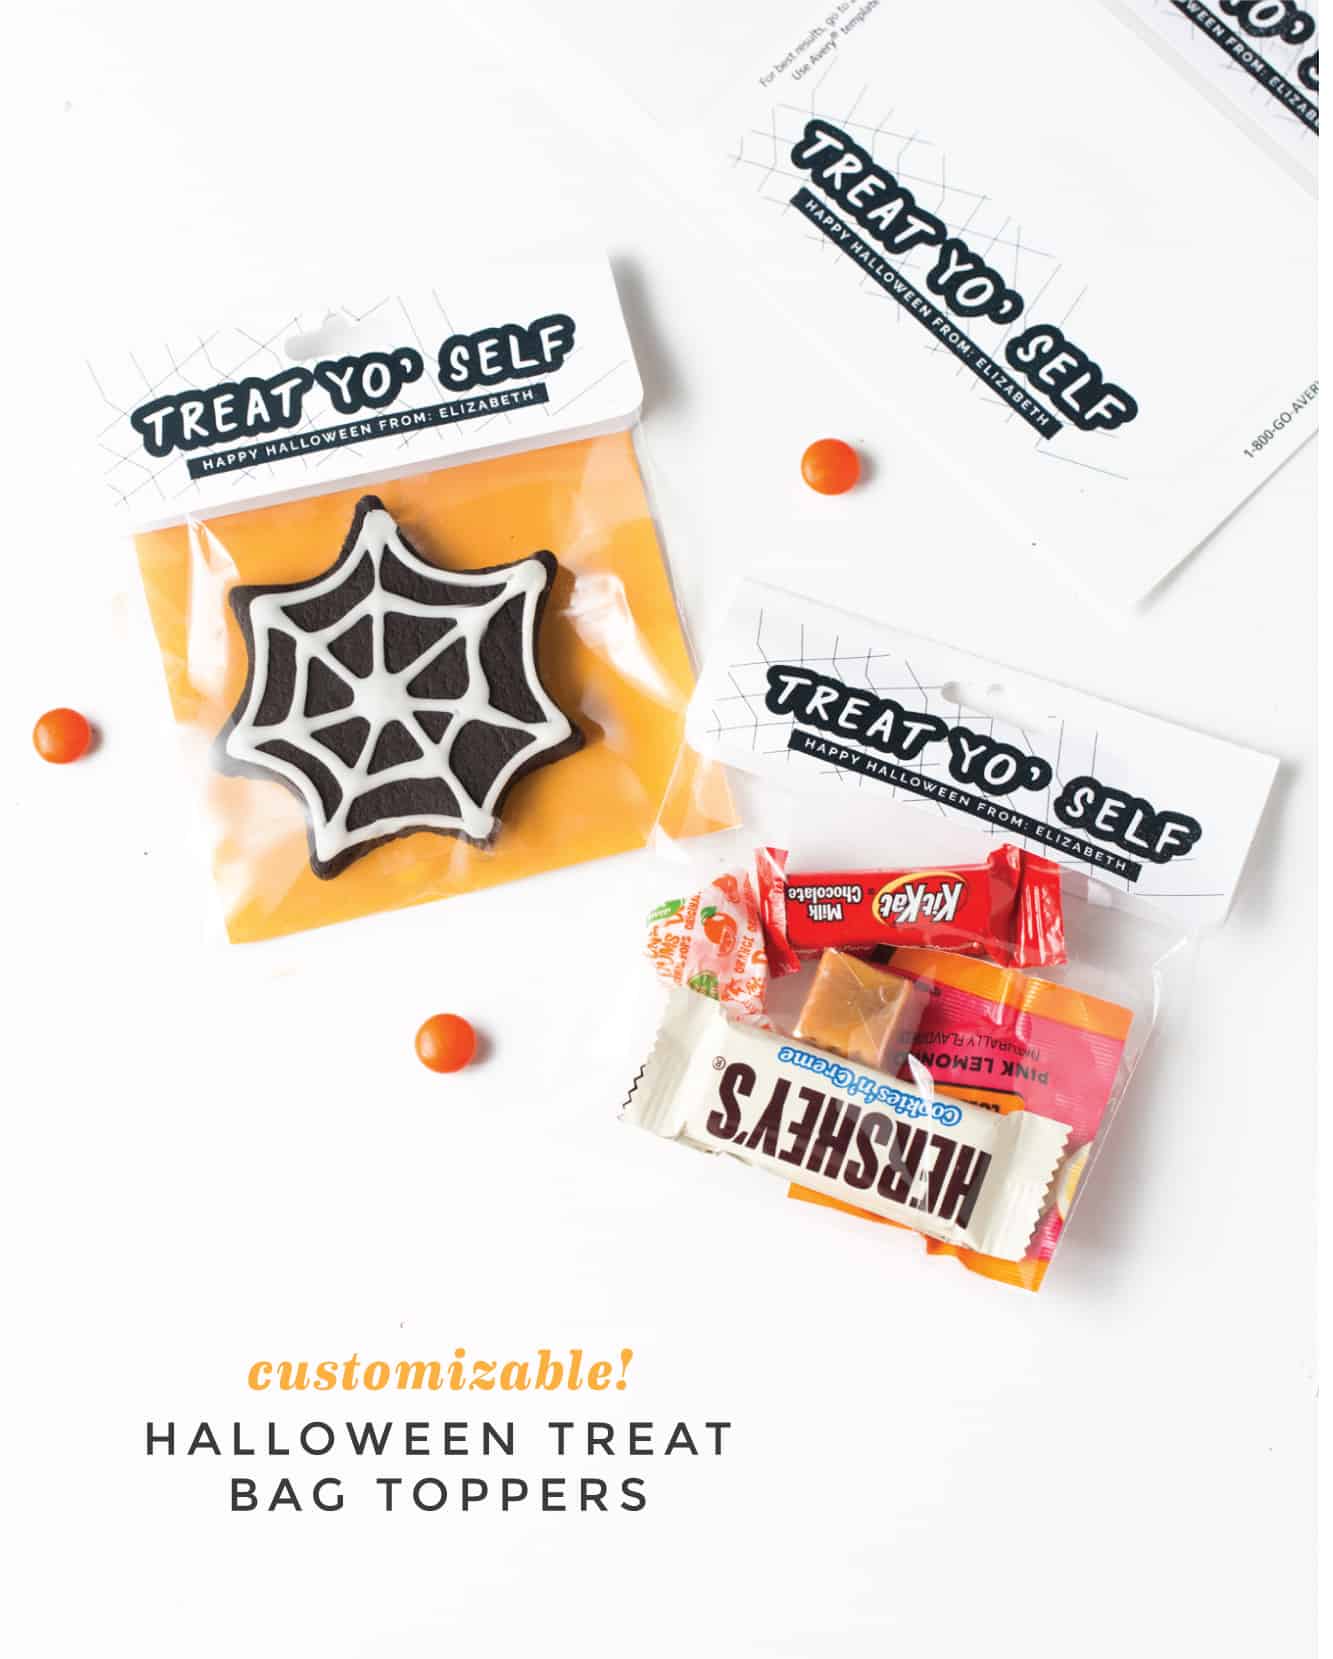 Throw the ultimate Halloween bash with this set of 3 black and white Halloween party printables! Designed for easy printing on Avery products, these printables can help you make the cutest Halloween party invitations and party favors! #Halloween #Printables // www.DesignEatRepeat.com